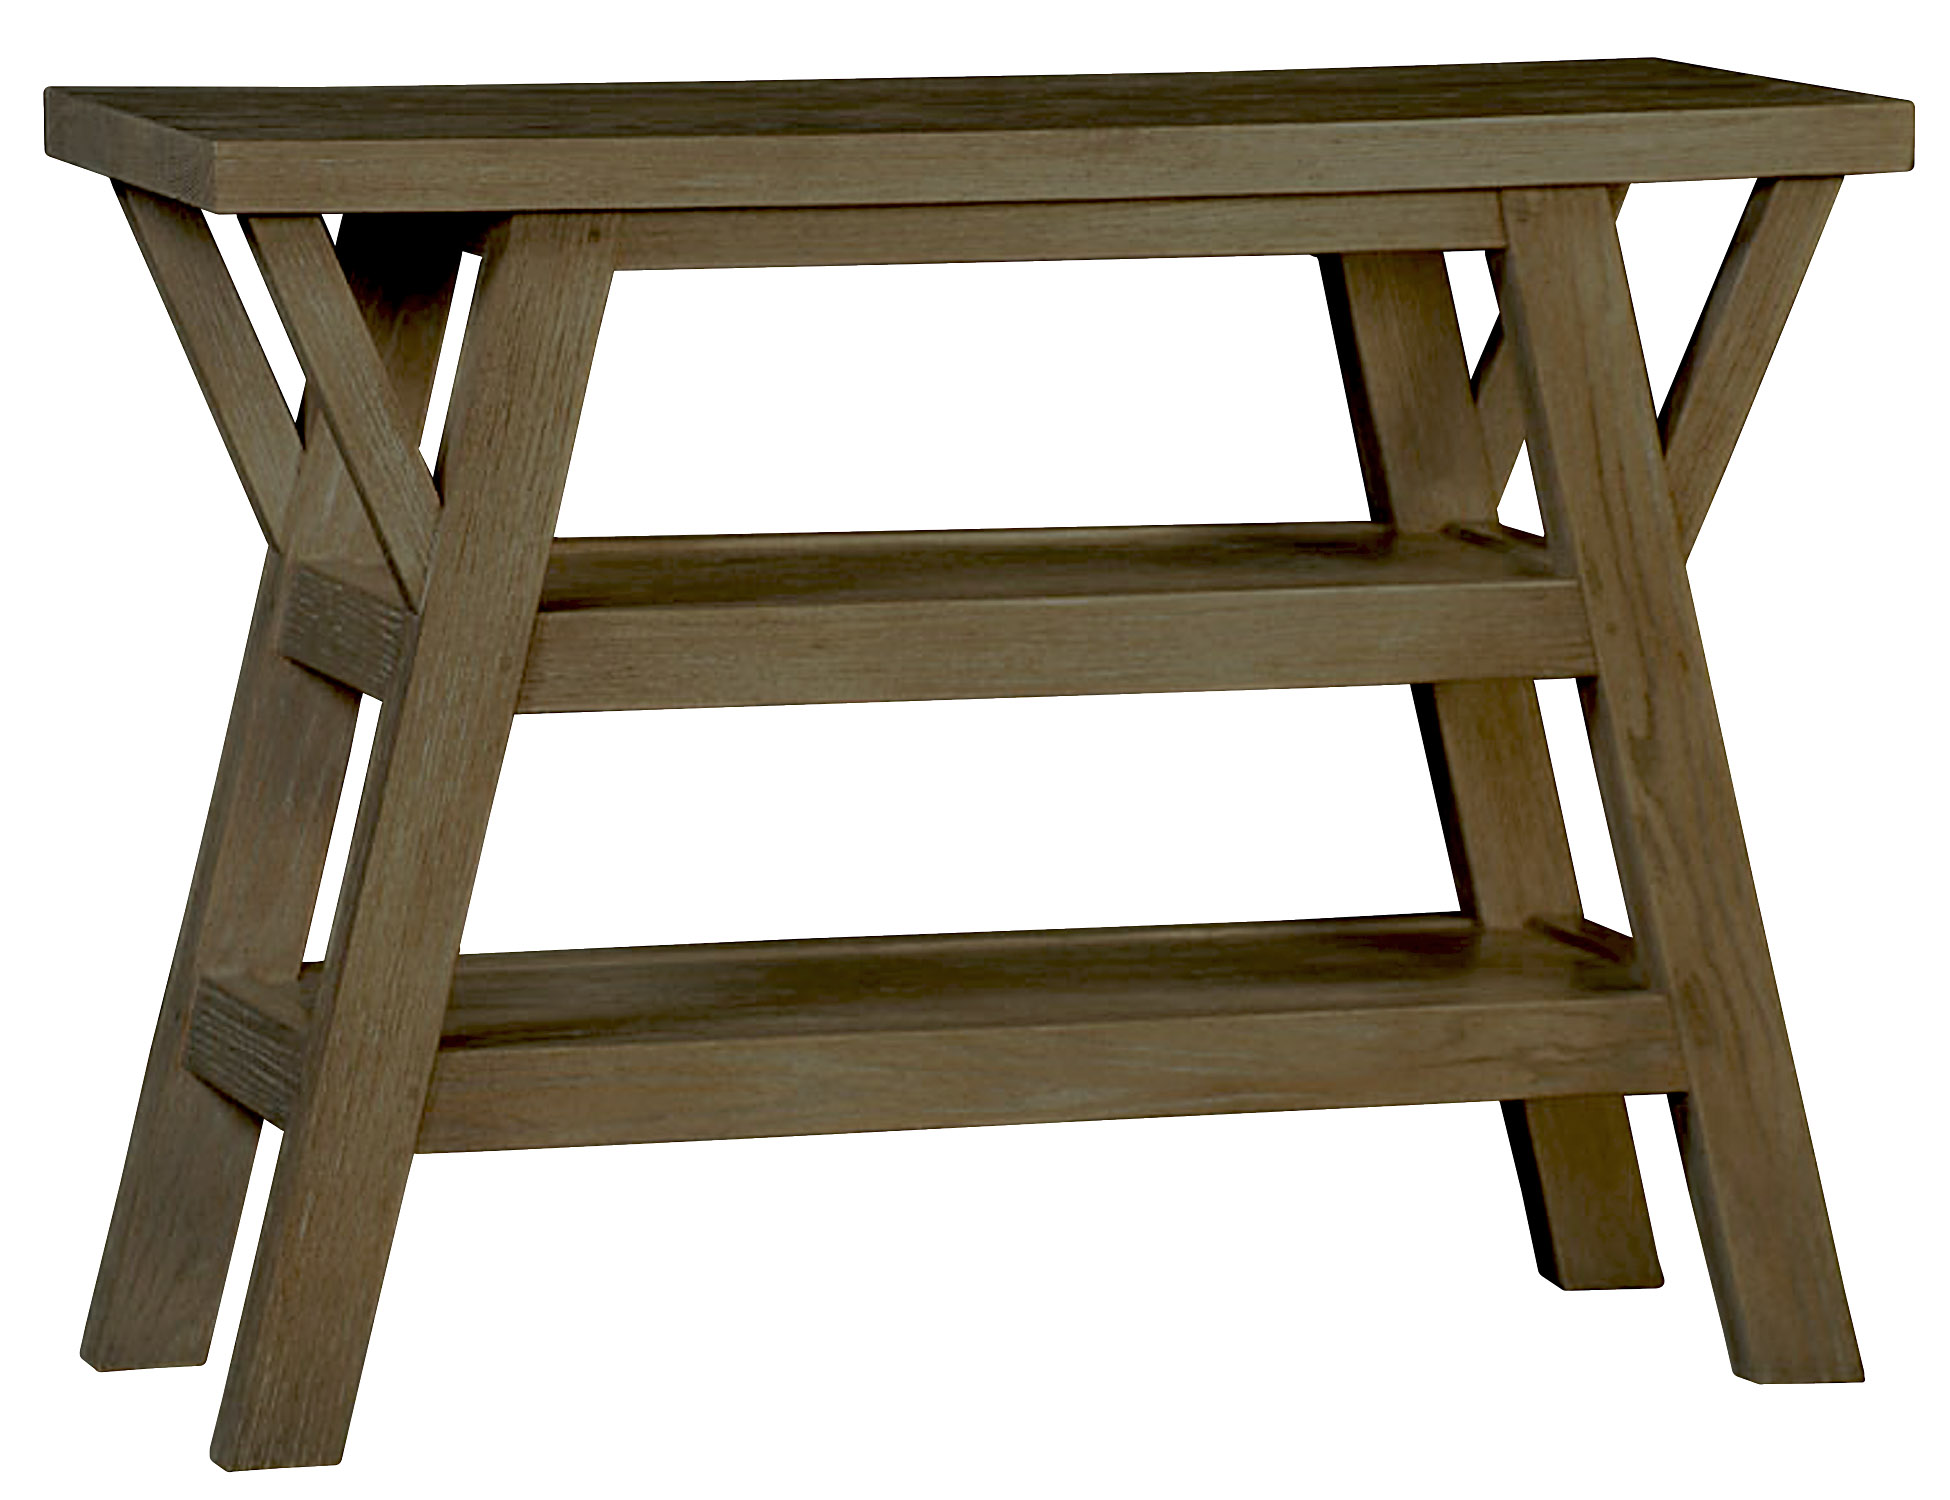 Arturo contemporary rustic modern sofa table shelves console by Woodland furniture in Idaho Falls